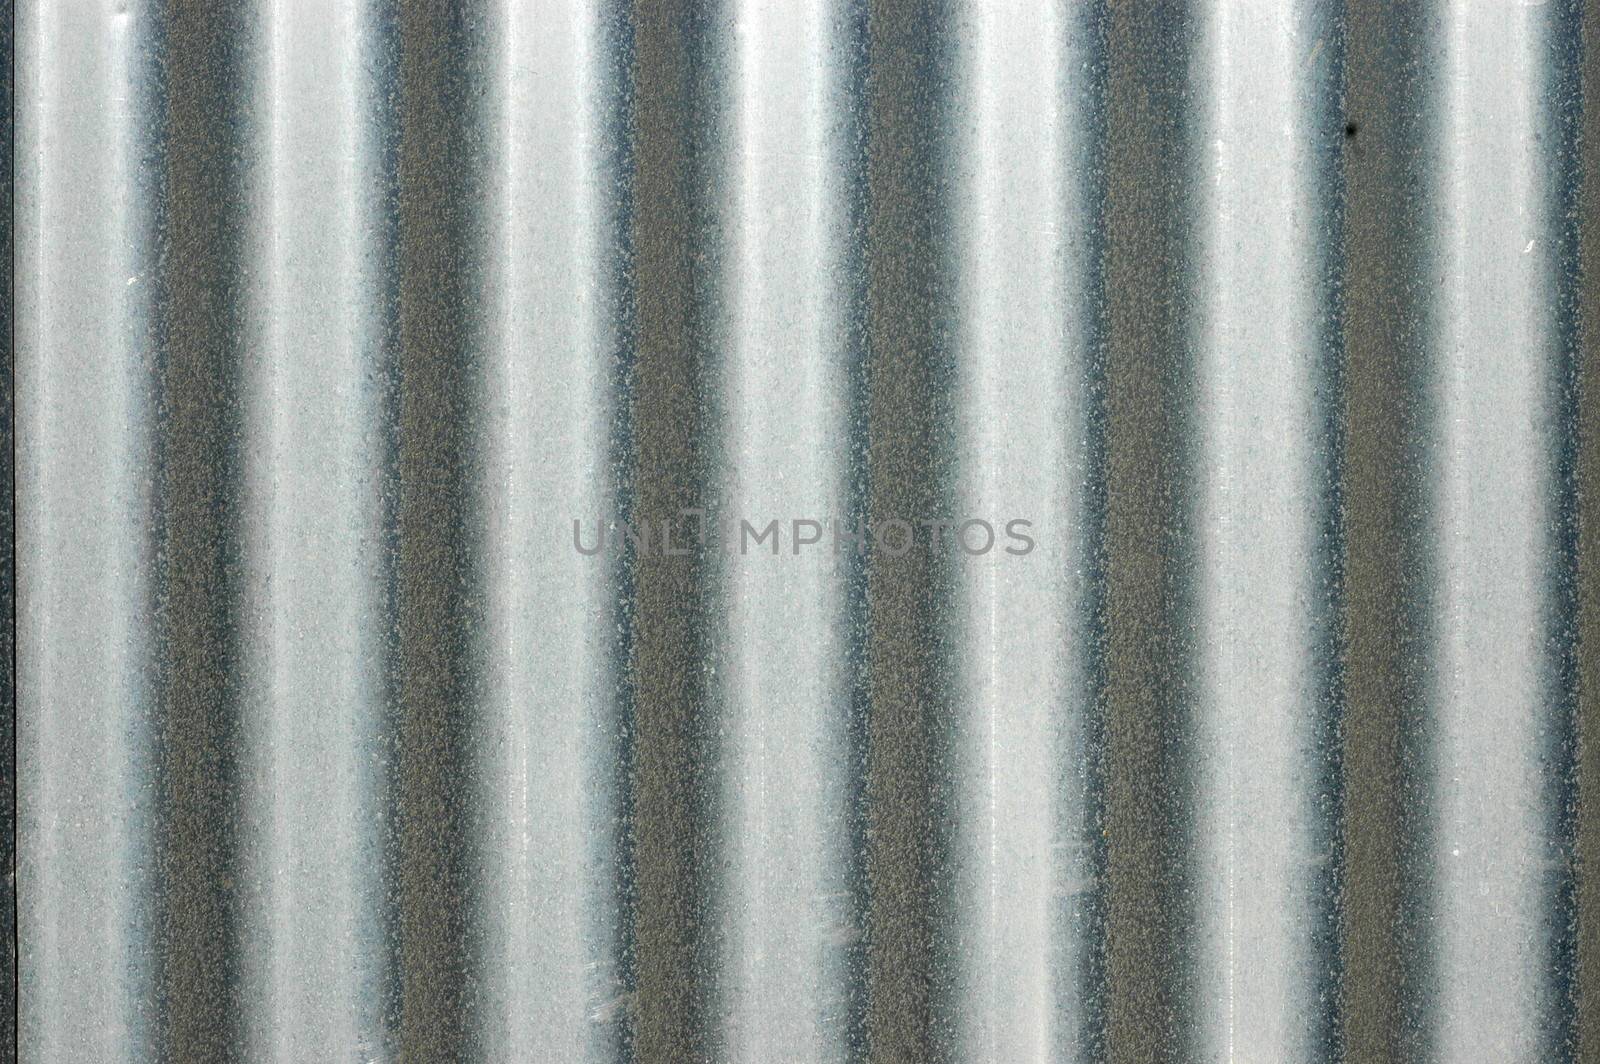 Abstract Background Texture of Corrugated Iron